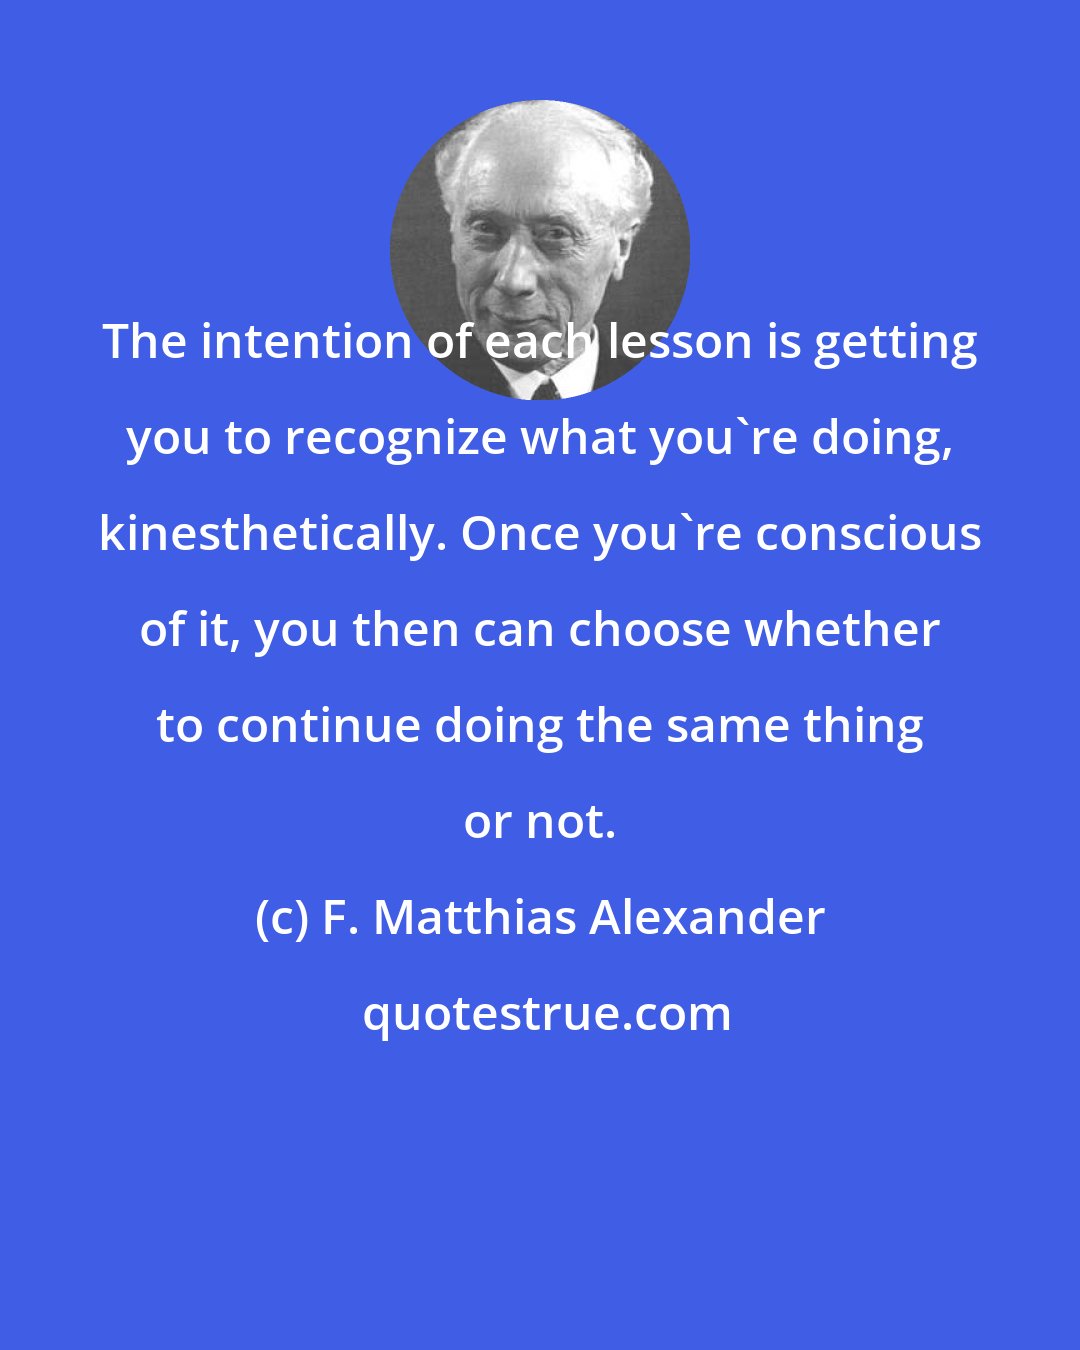 F. Matthias Alexander: The intention of each lesson is getting you to recognize what you're doing, kinesthetically. Once you're conscious of it, you then can choose whether to continue doing the same thing or not.